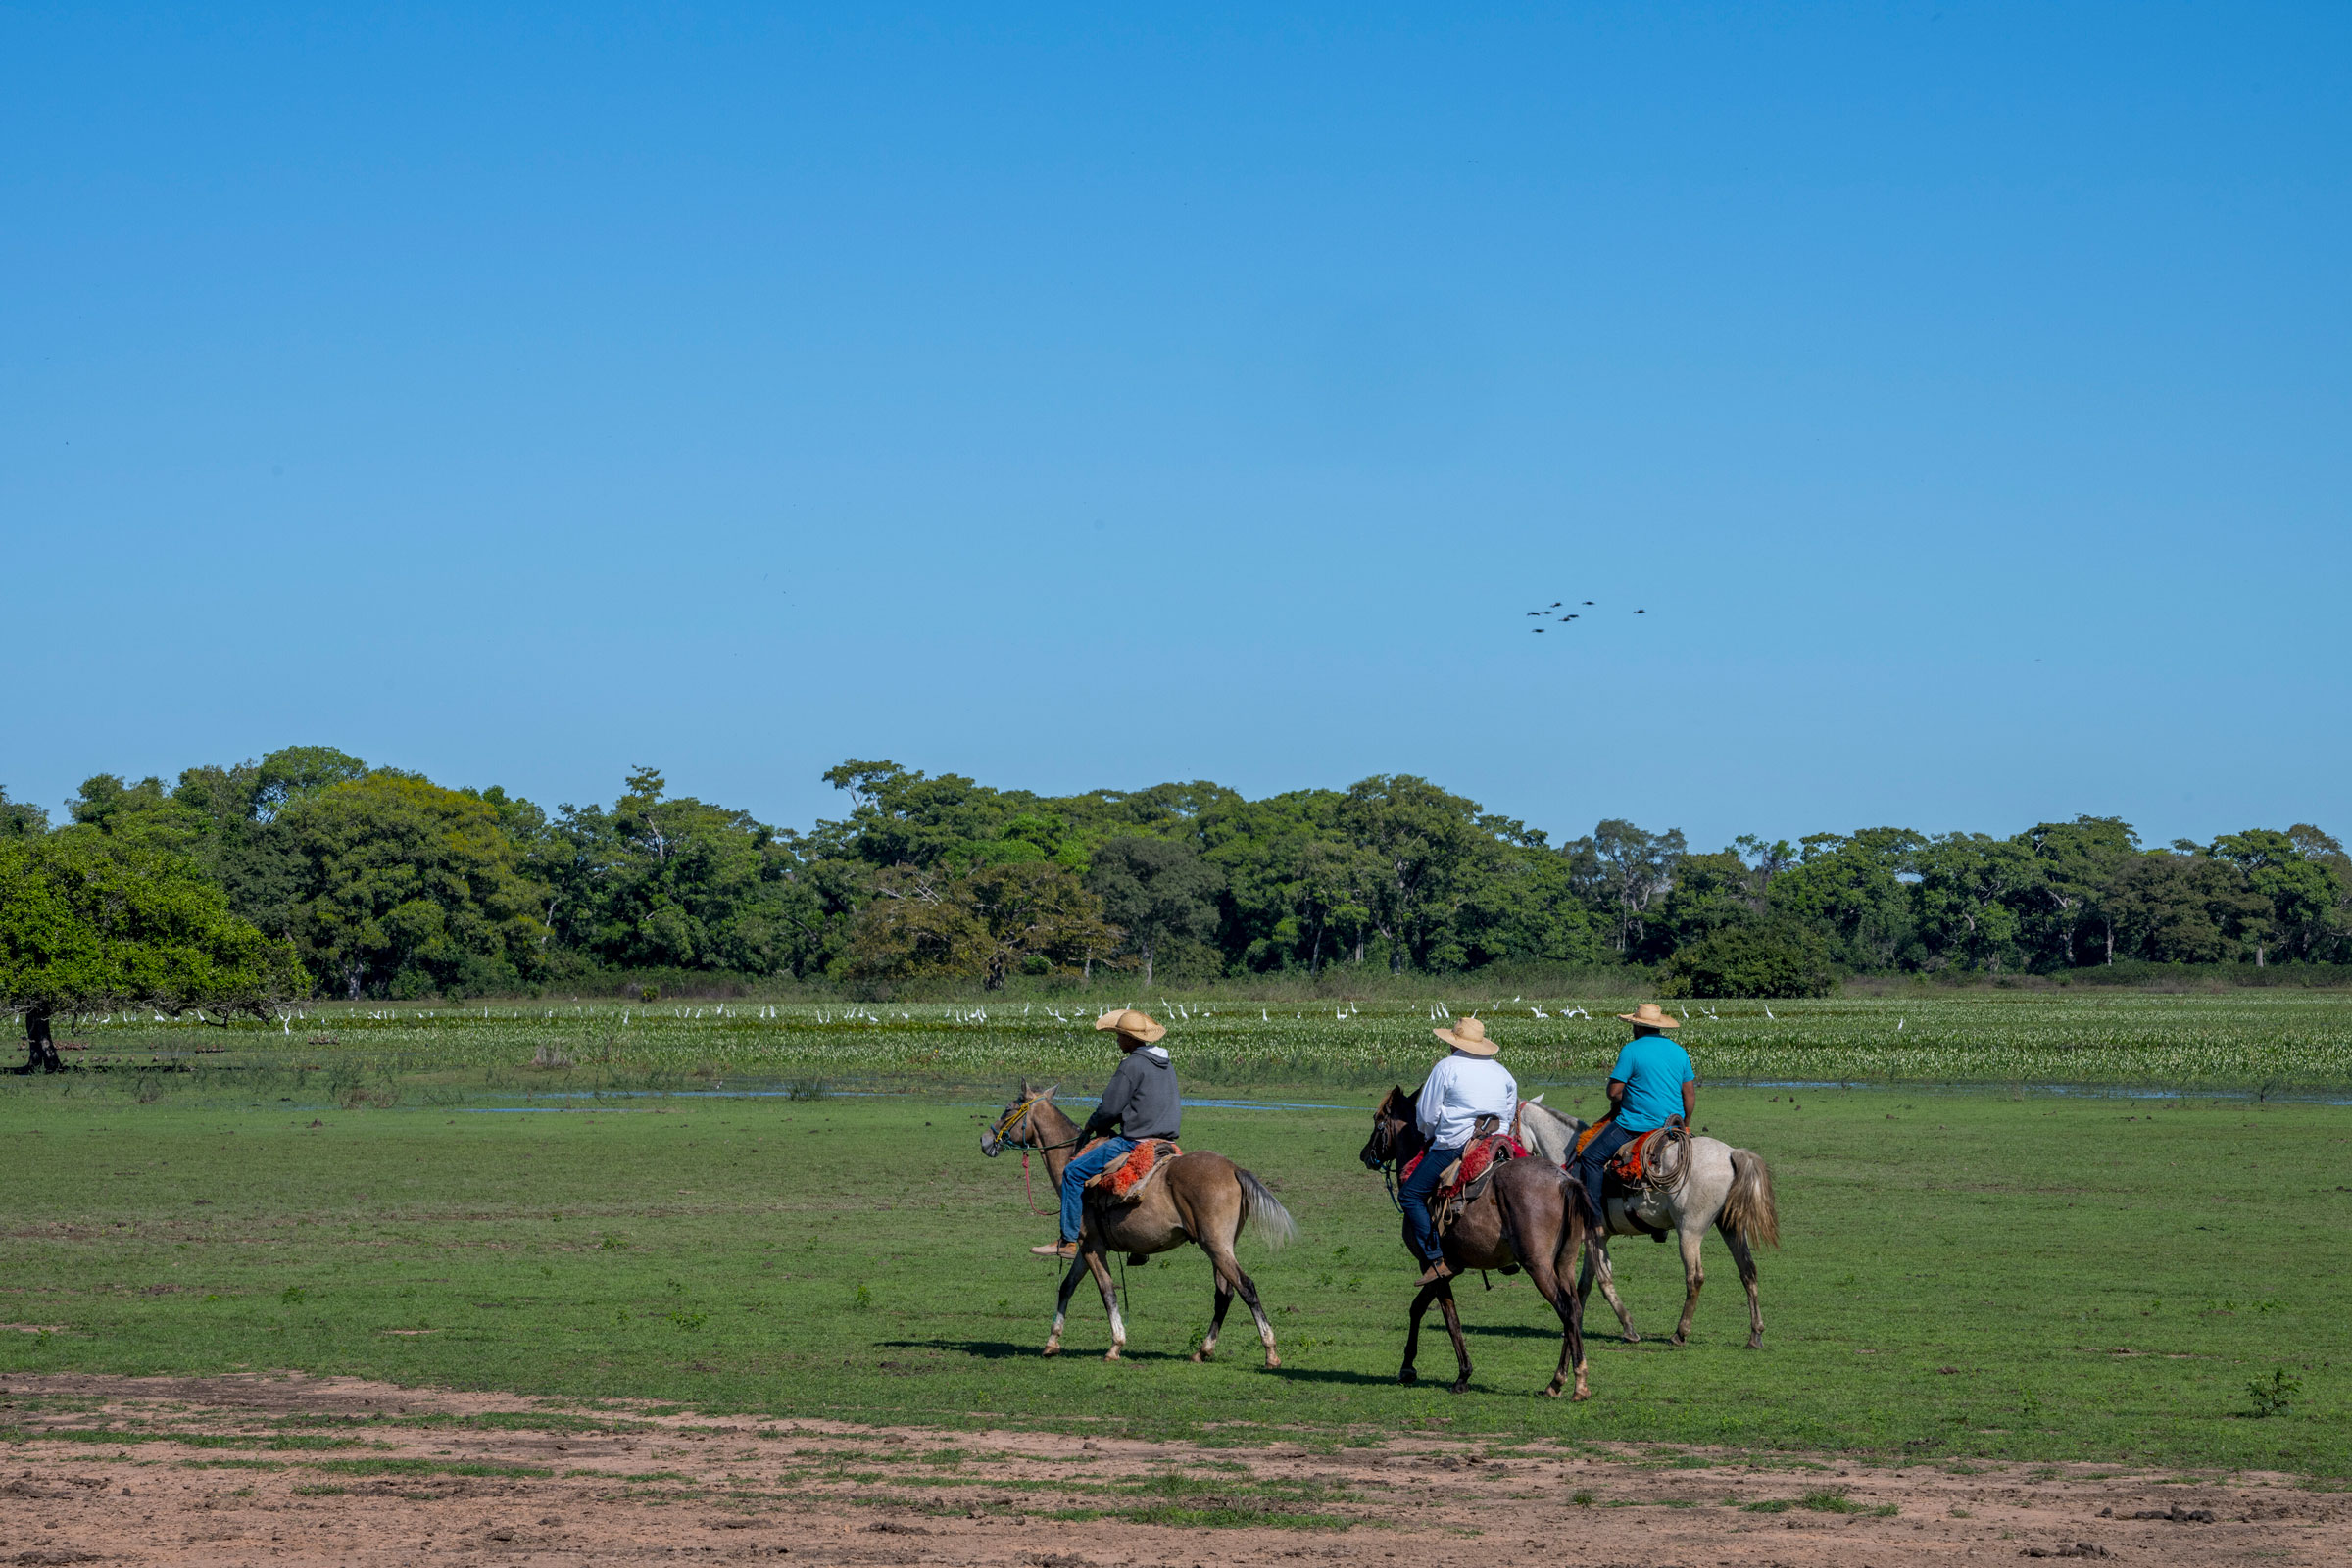 Pantaneiros [Brazilian cowboys] on horseback near the Piuval Lodge in the Northern Pantanal, State of Mato Grosso, Brazil. (Wolfgang Kaehler—LightRocket/Getty Images)